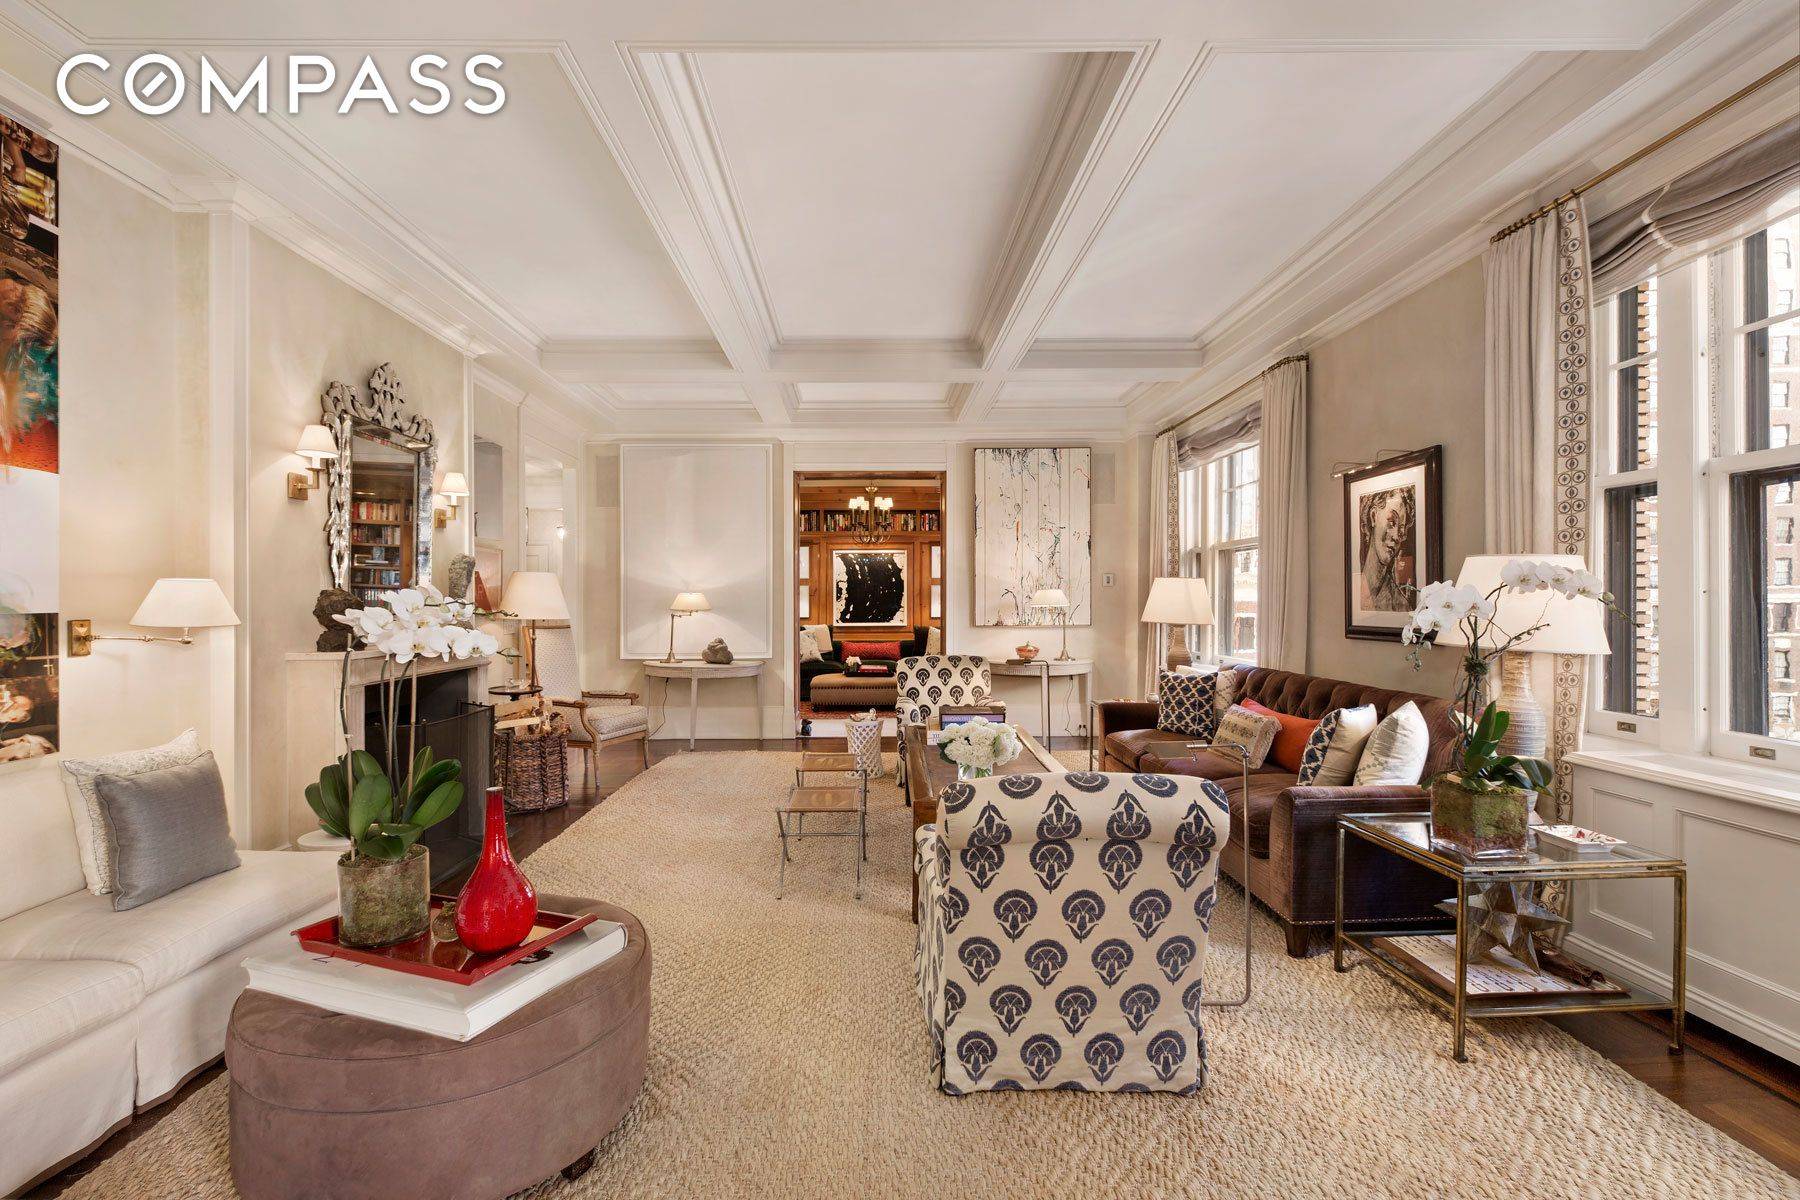 Sensational and Spacious on Park Avenue This exceptionally beautiful 13 room cooperative with 4 bedrooms and 2 staff bedrooms exudes pre war grandeur and timeless elegance.